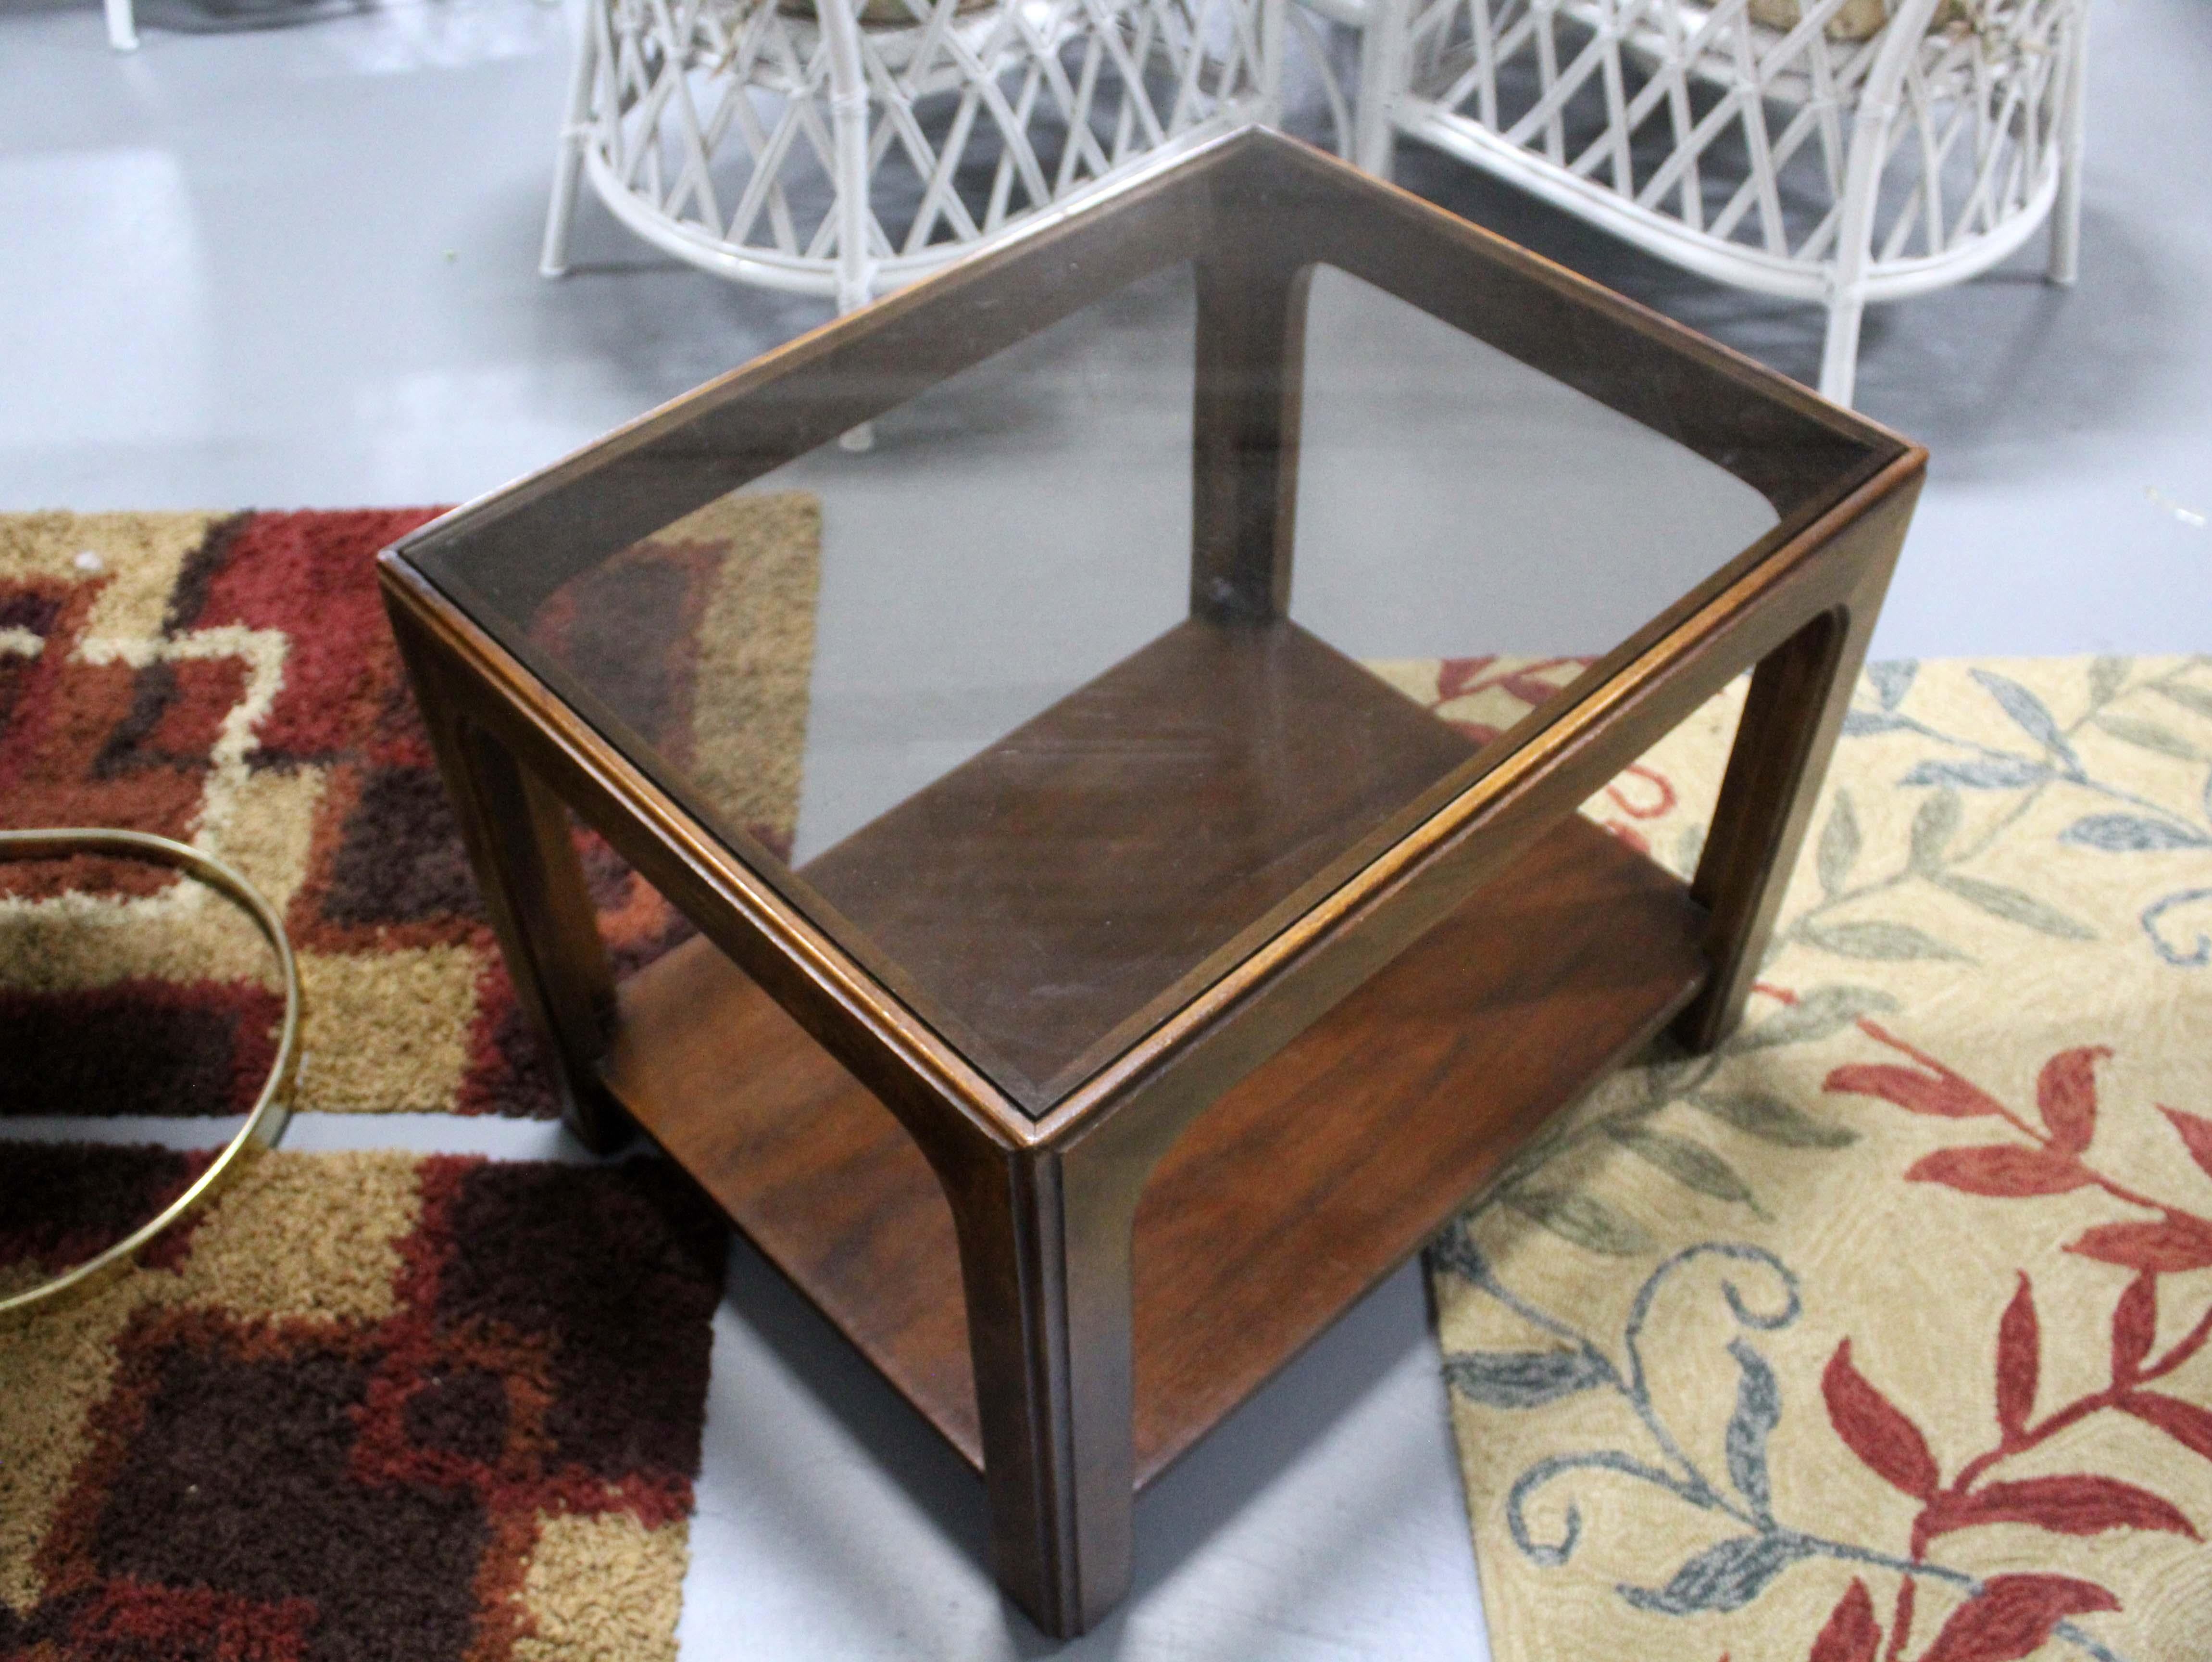 For your consideration is this classic clean-line Brown Saltman square walnut & glass side table. Dimensions: 27